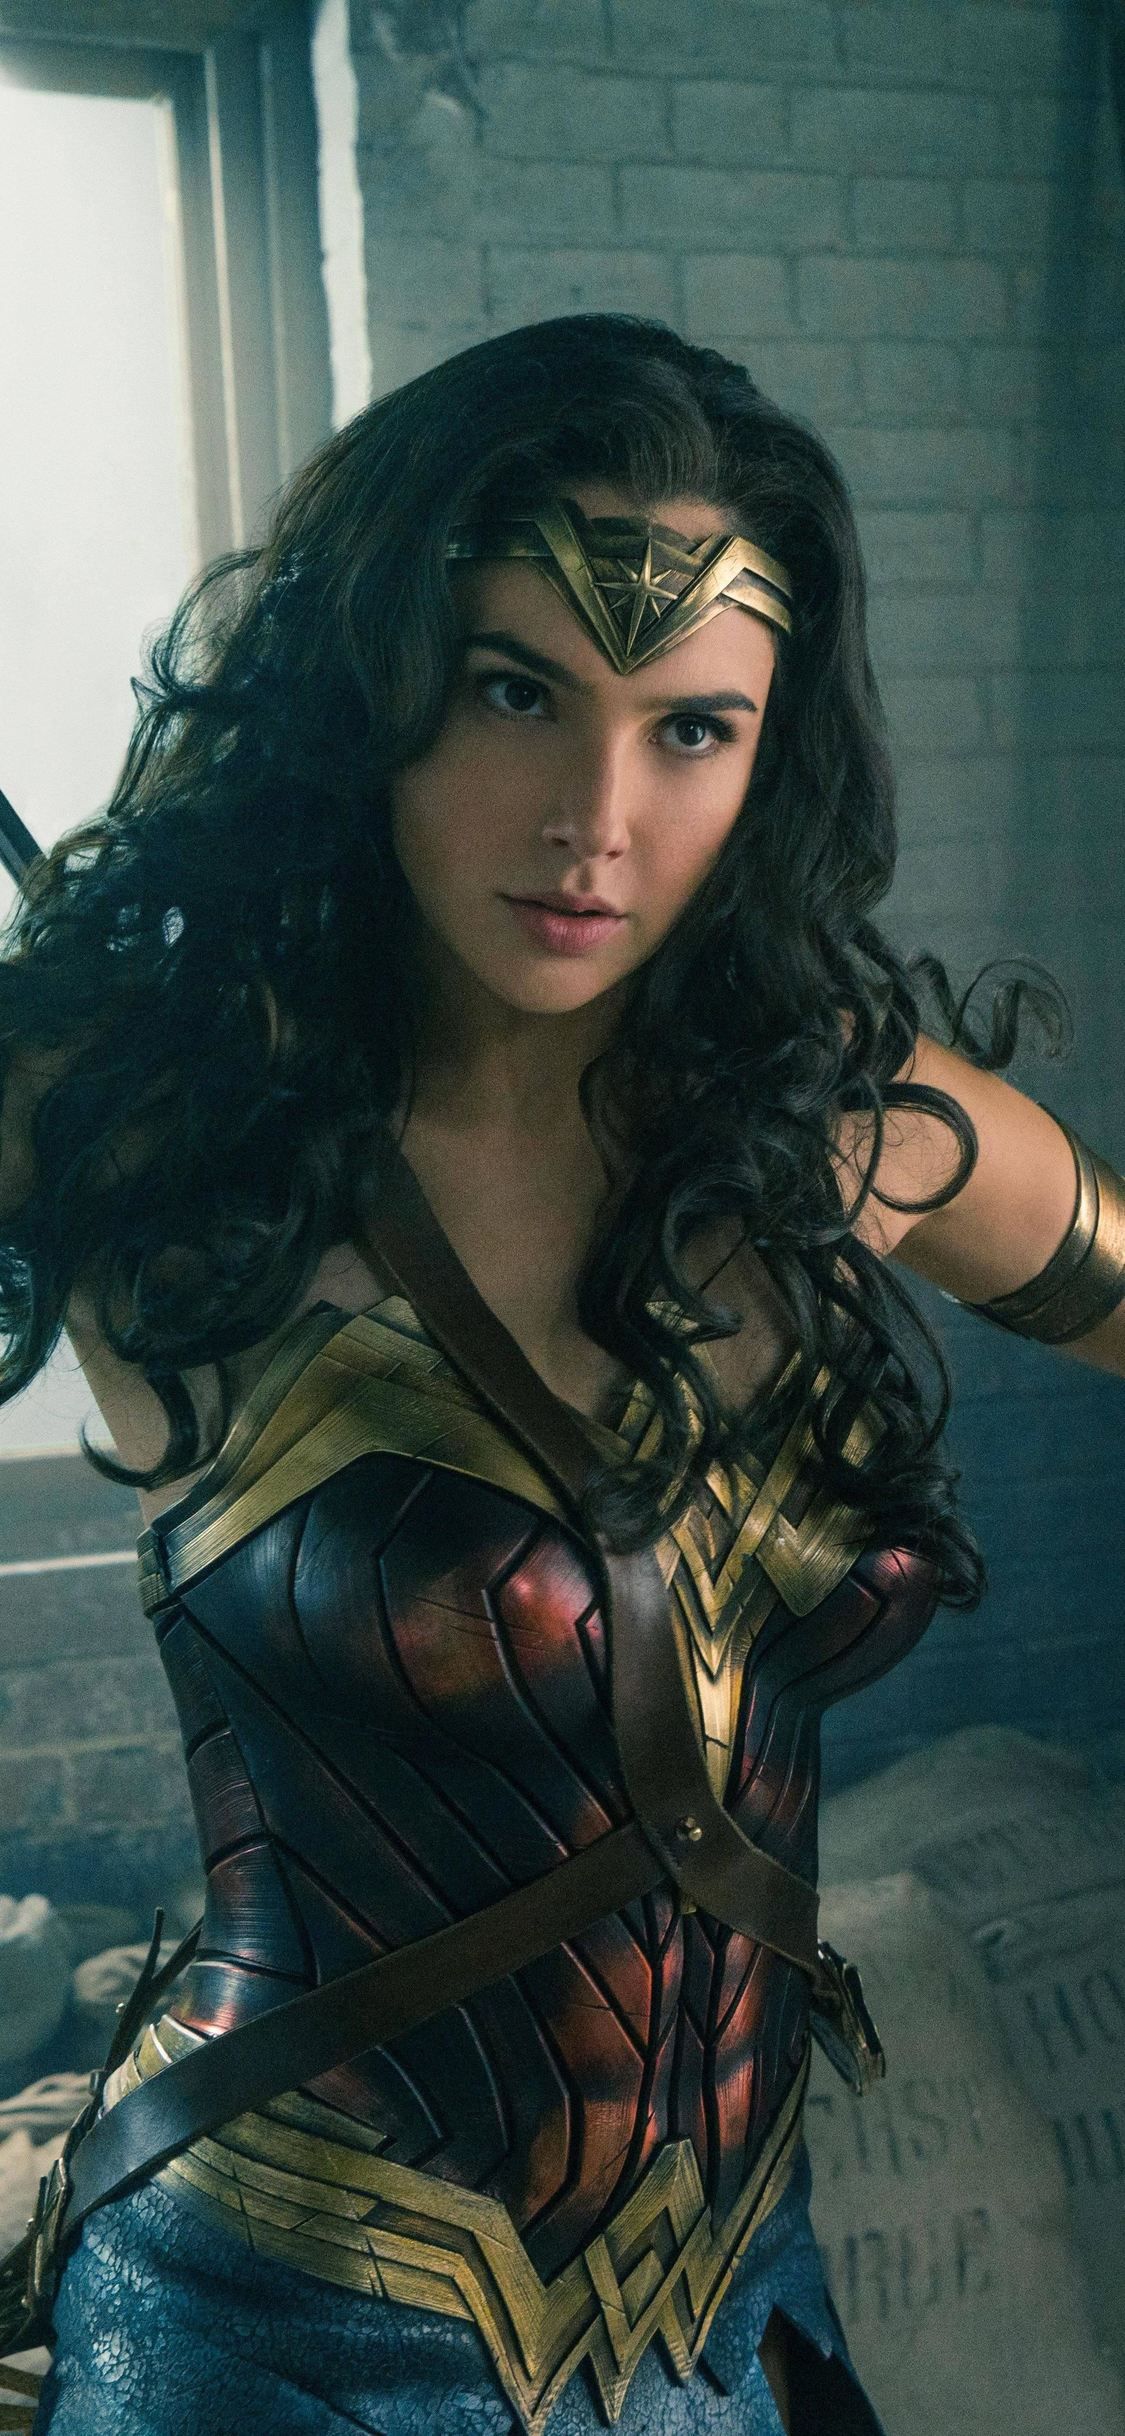 Wonder Woman 8k iPhone XS, iPhone iPhone X HD 4k Wallpaper, Image, Background, Photo and Picture. Wonder woman, Gal gadot wonder woman, Gal gardot